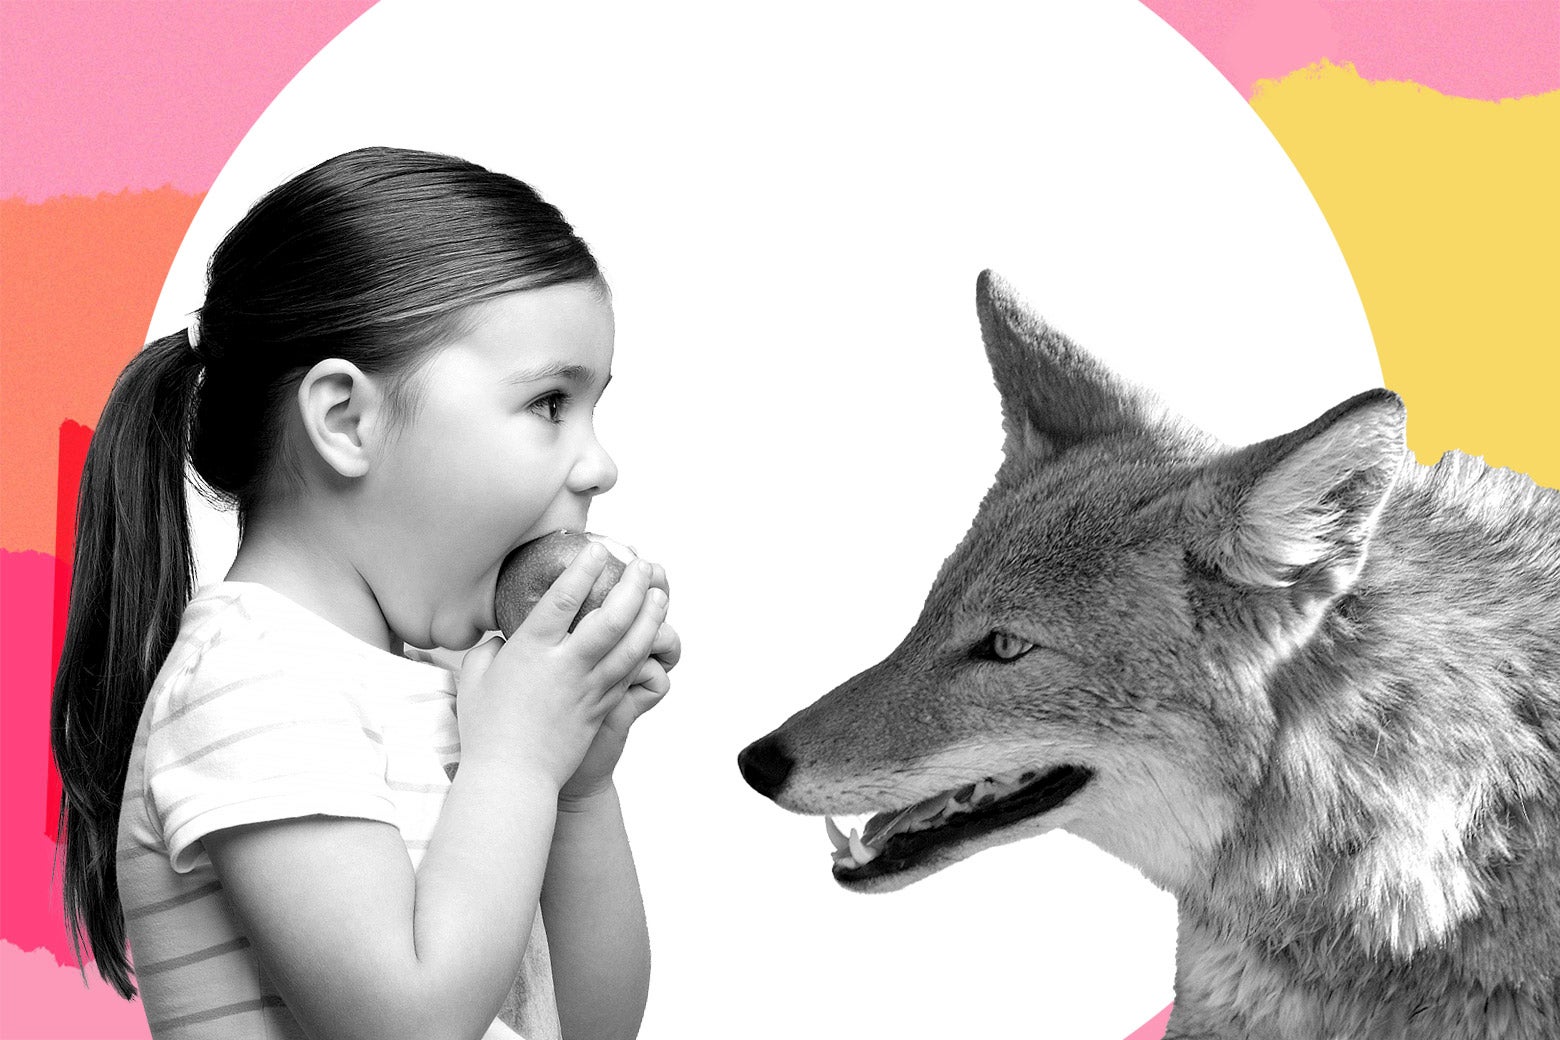 A little girl eats an apple in front of a coyote.